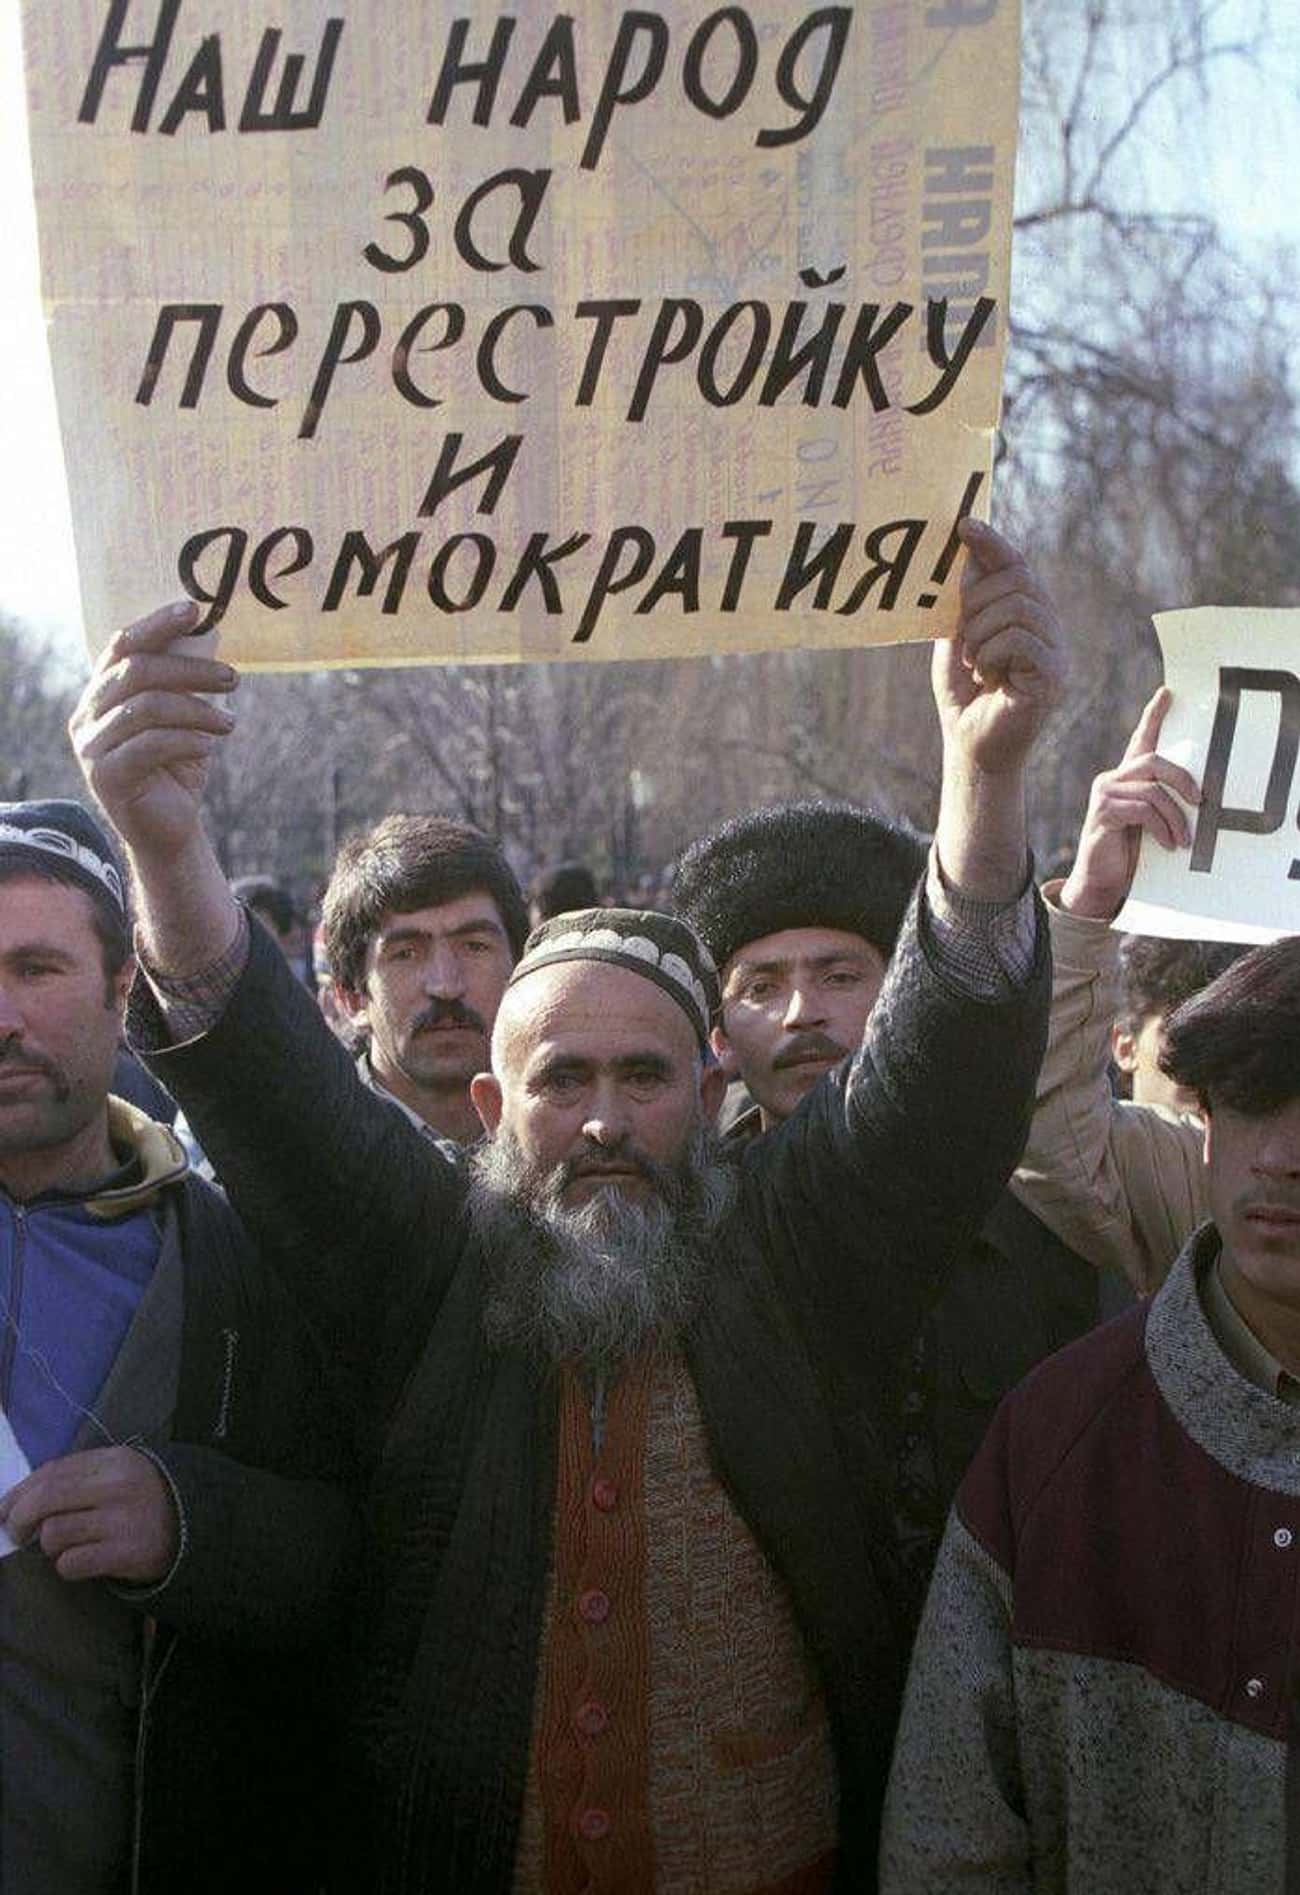 Protestor From February 1990 Movement In Dushanbe, Tajikistan